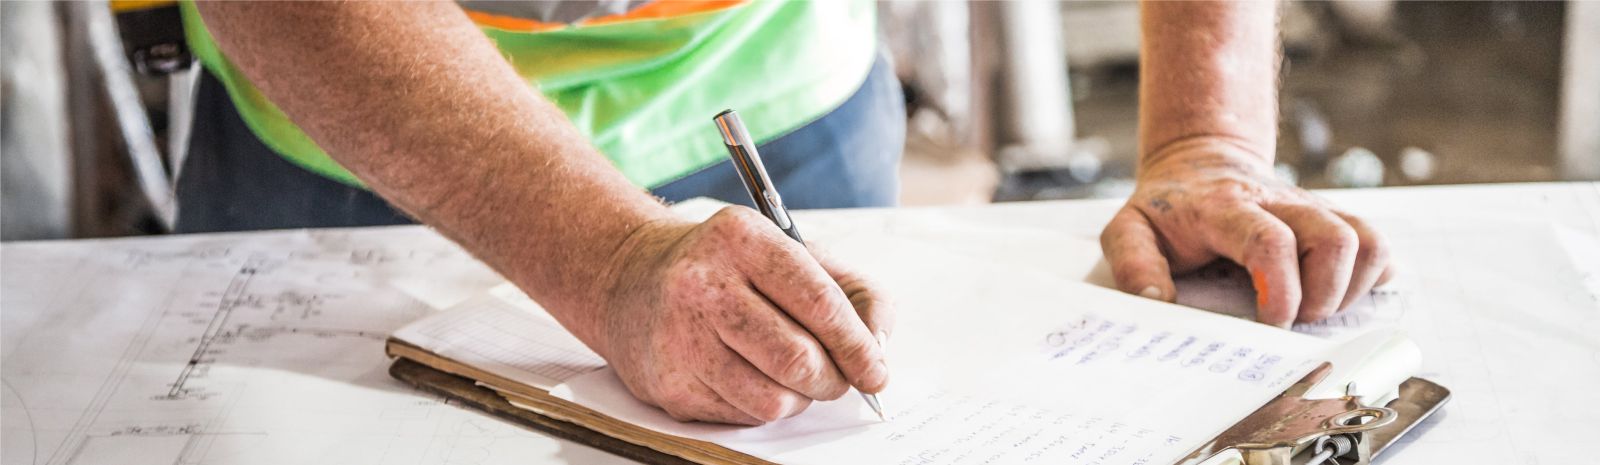 Male construction worker writing on clipboard.